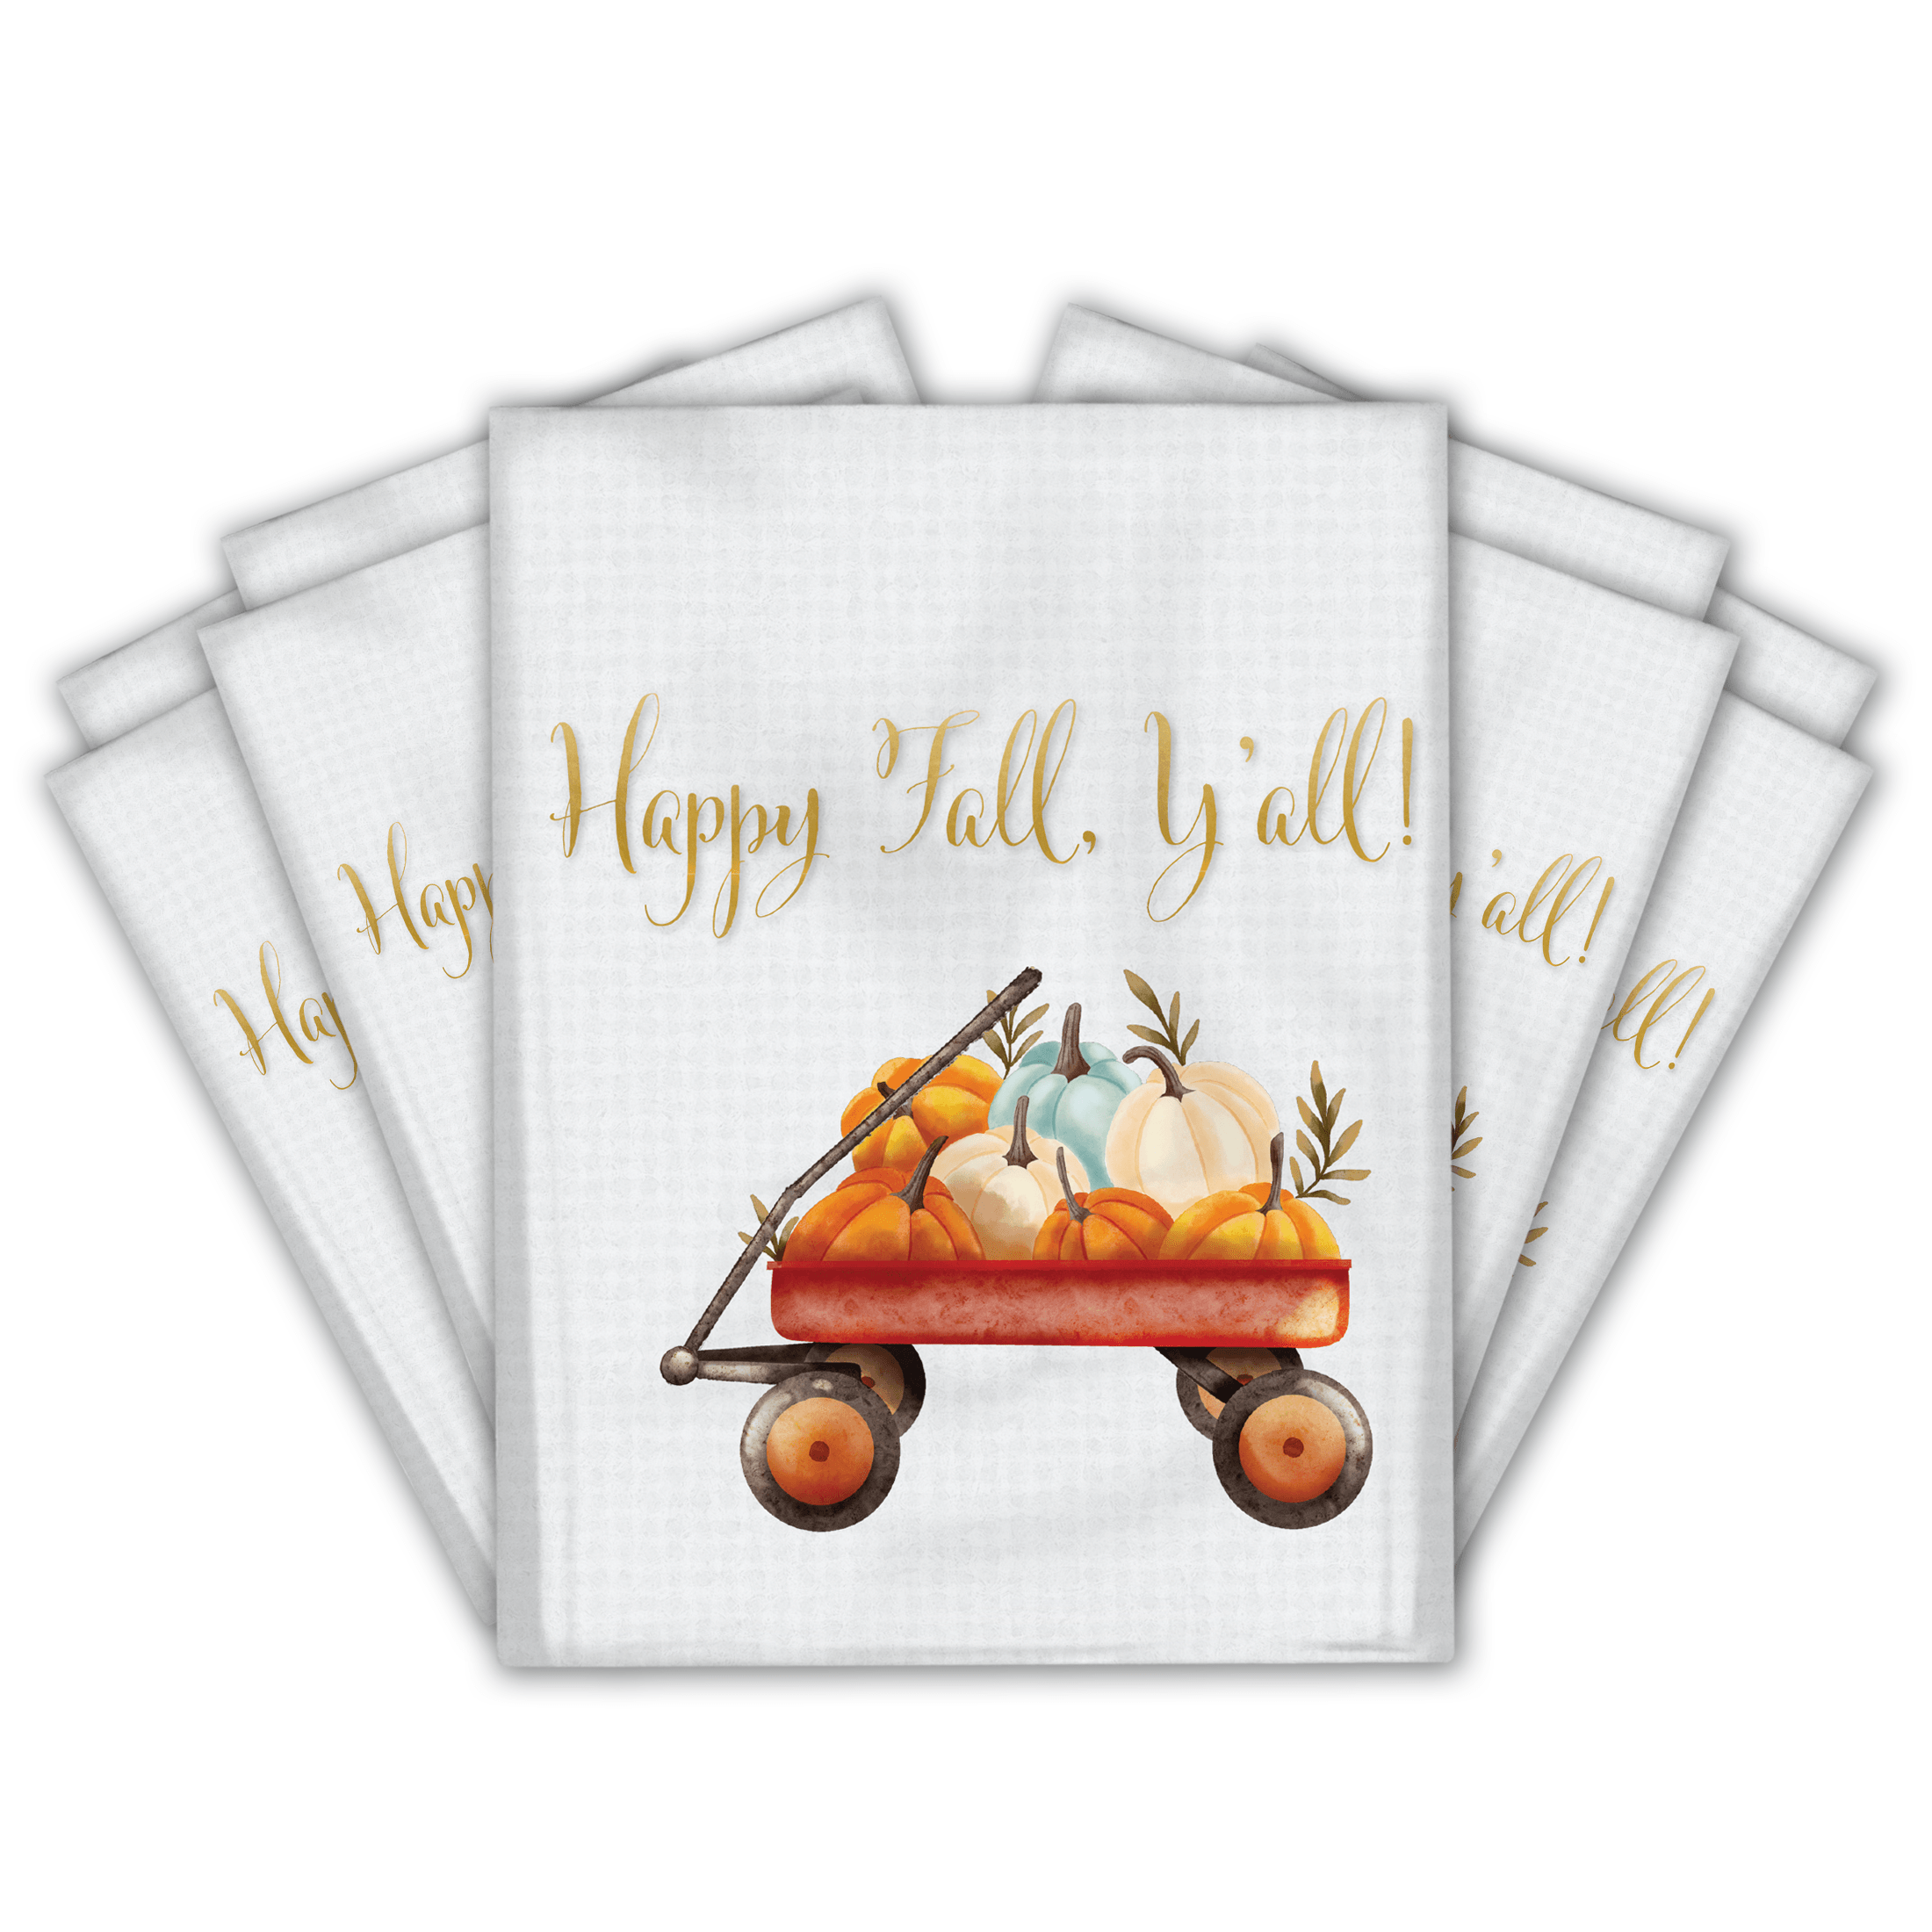 10x13 Hello Fall Designer Poly Mailers Shipping Envelopes Premium Printed Bags - Pro Supply Global